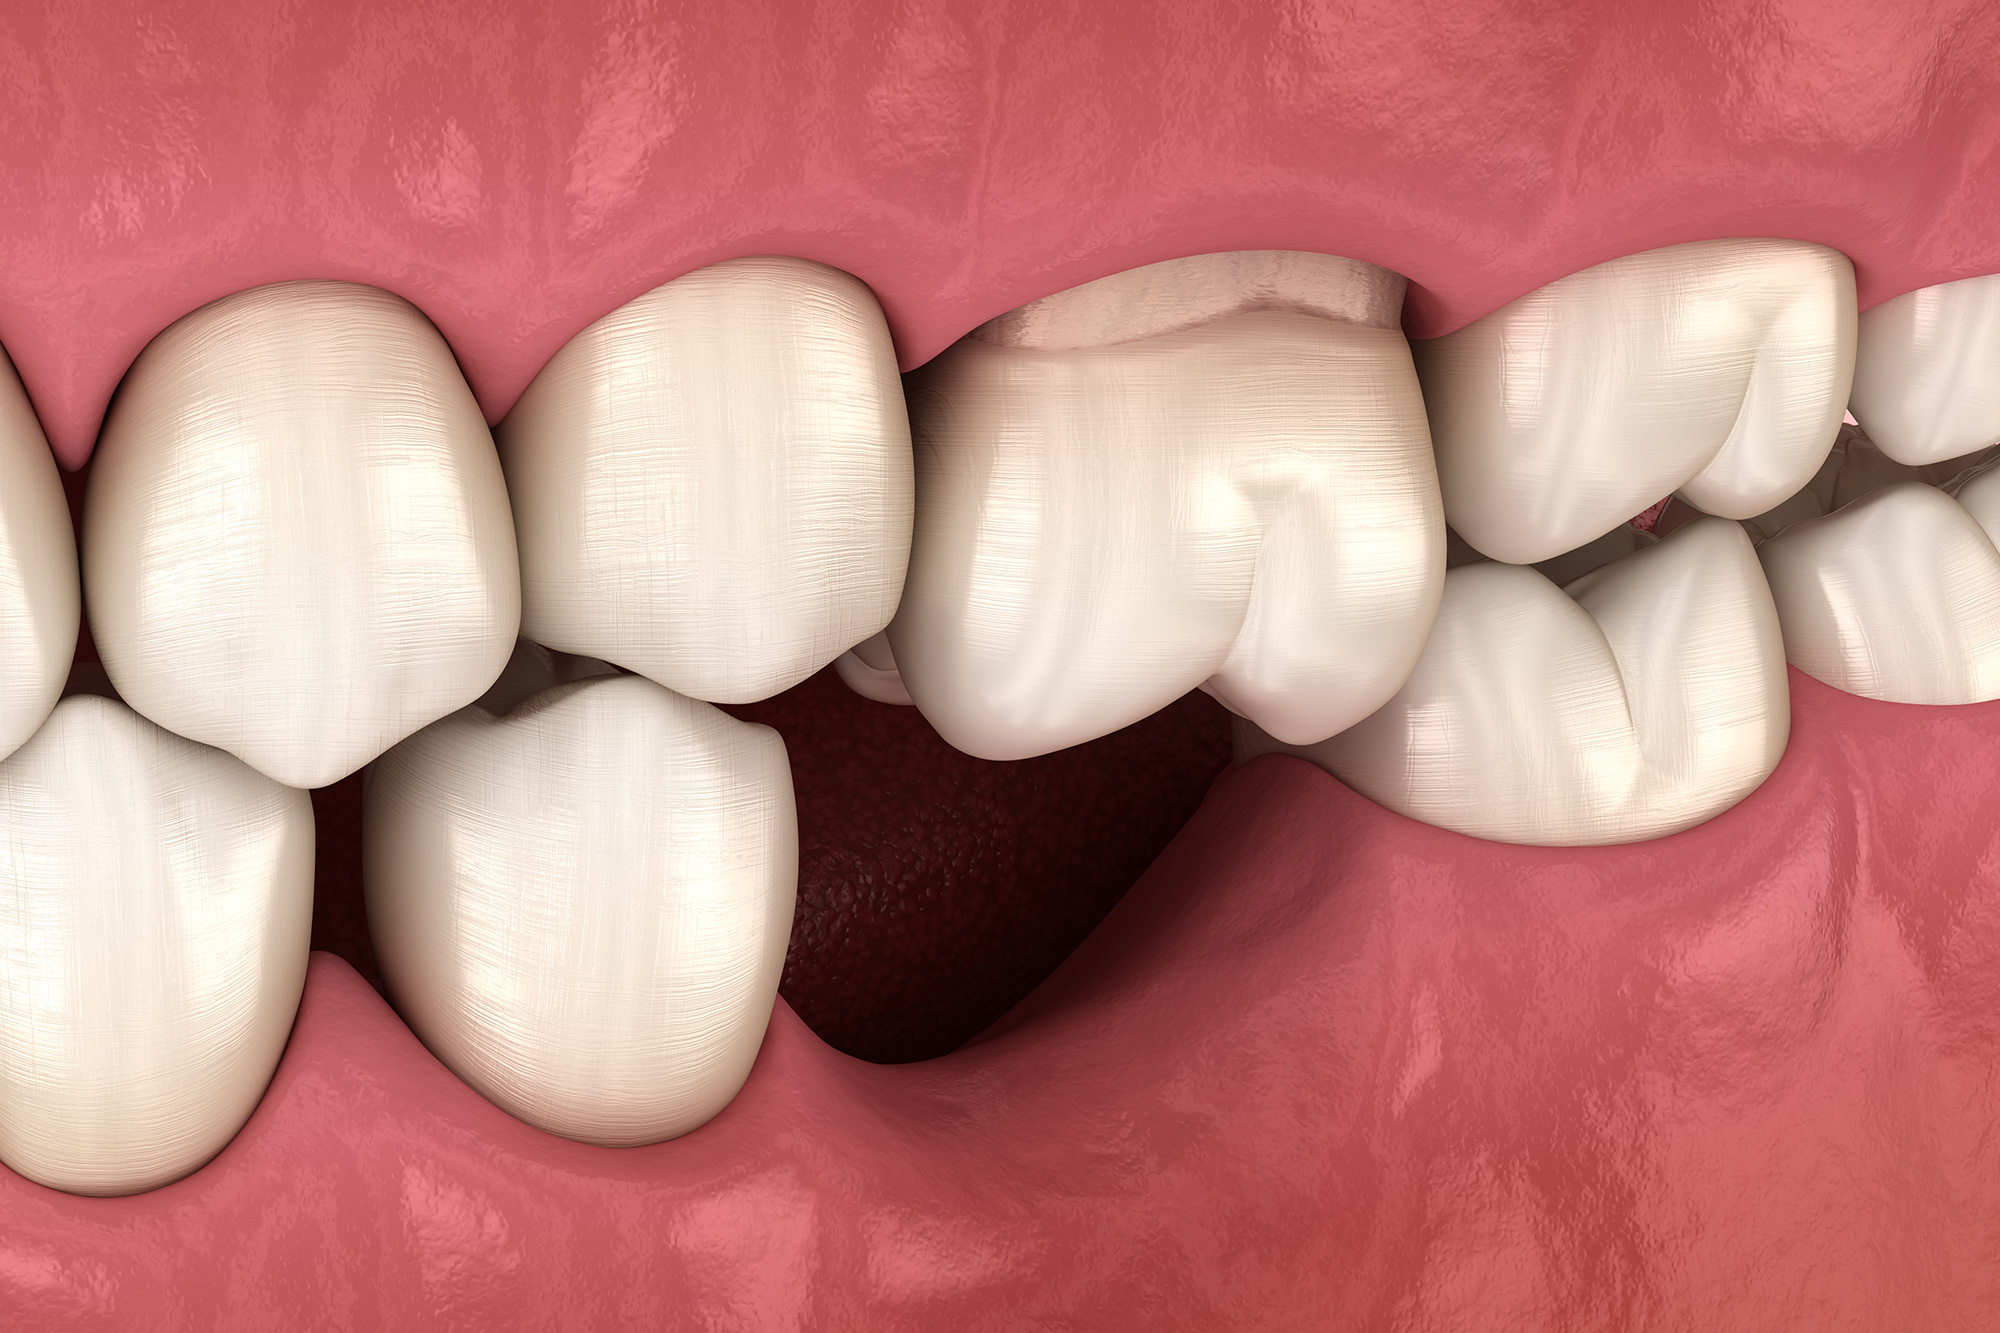 Tooth and Bone Loss Pensacola Periodontics and Implant Dentistry Pensacola, FL